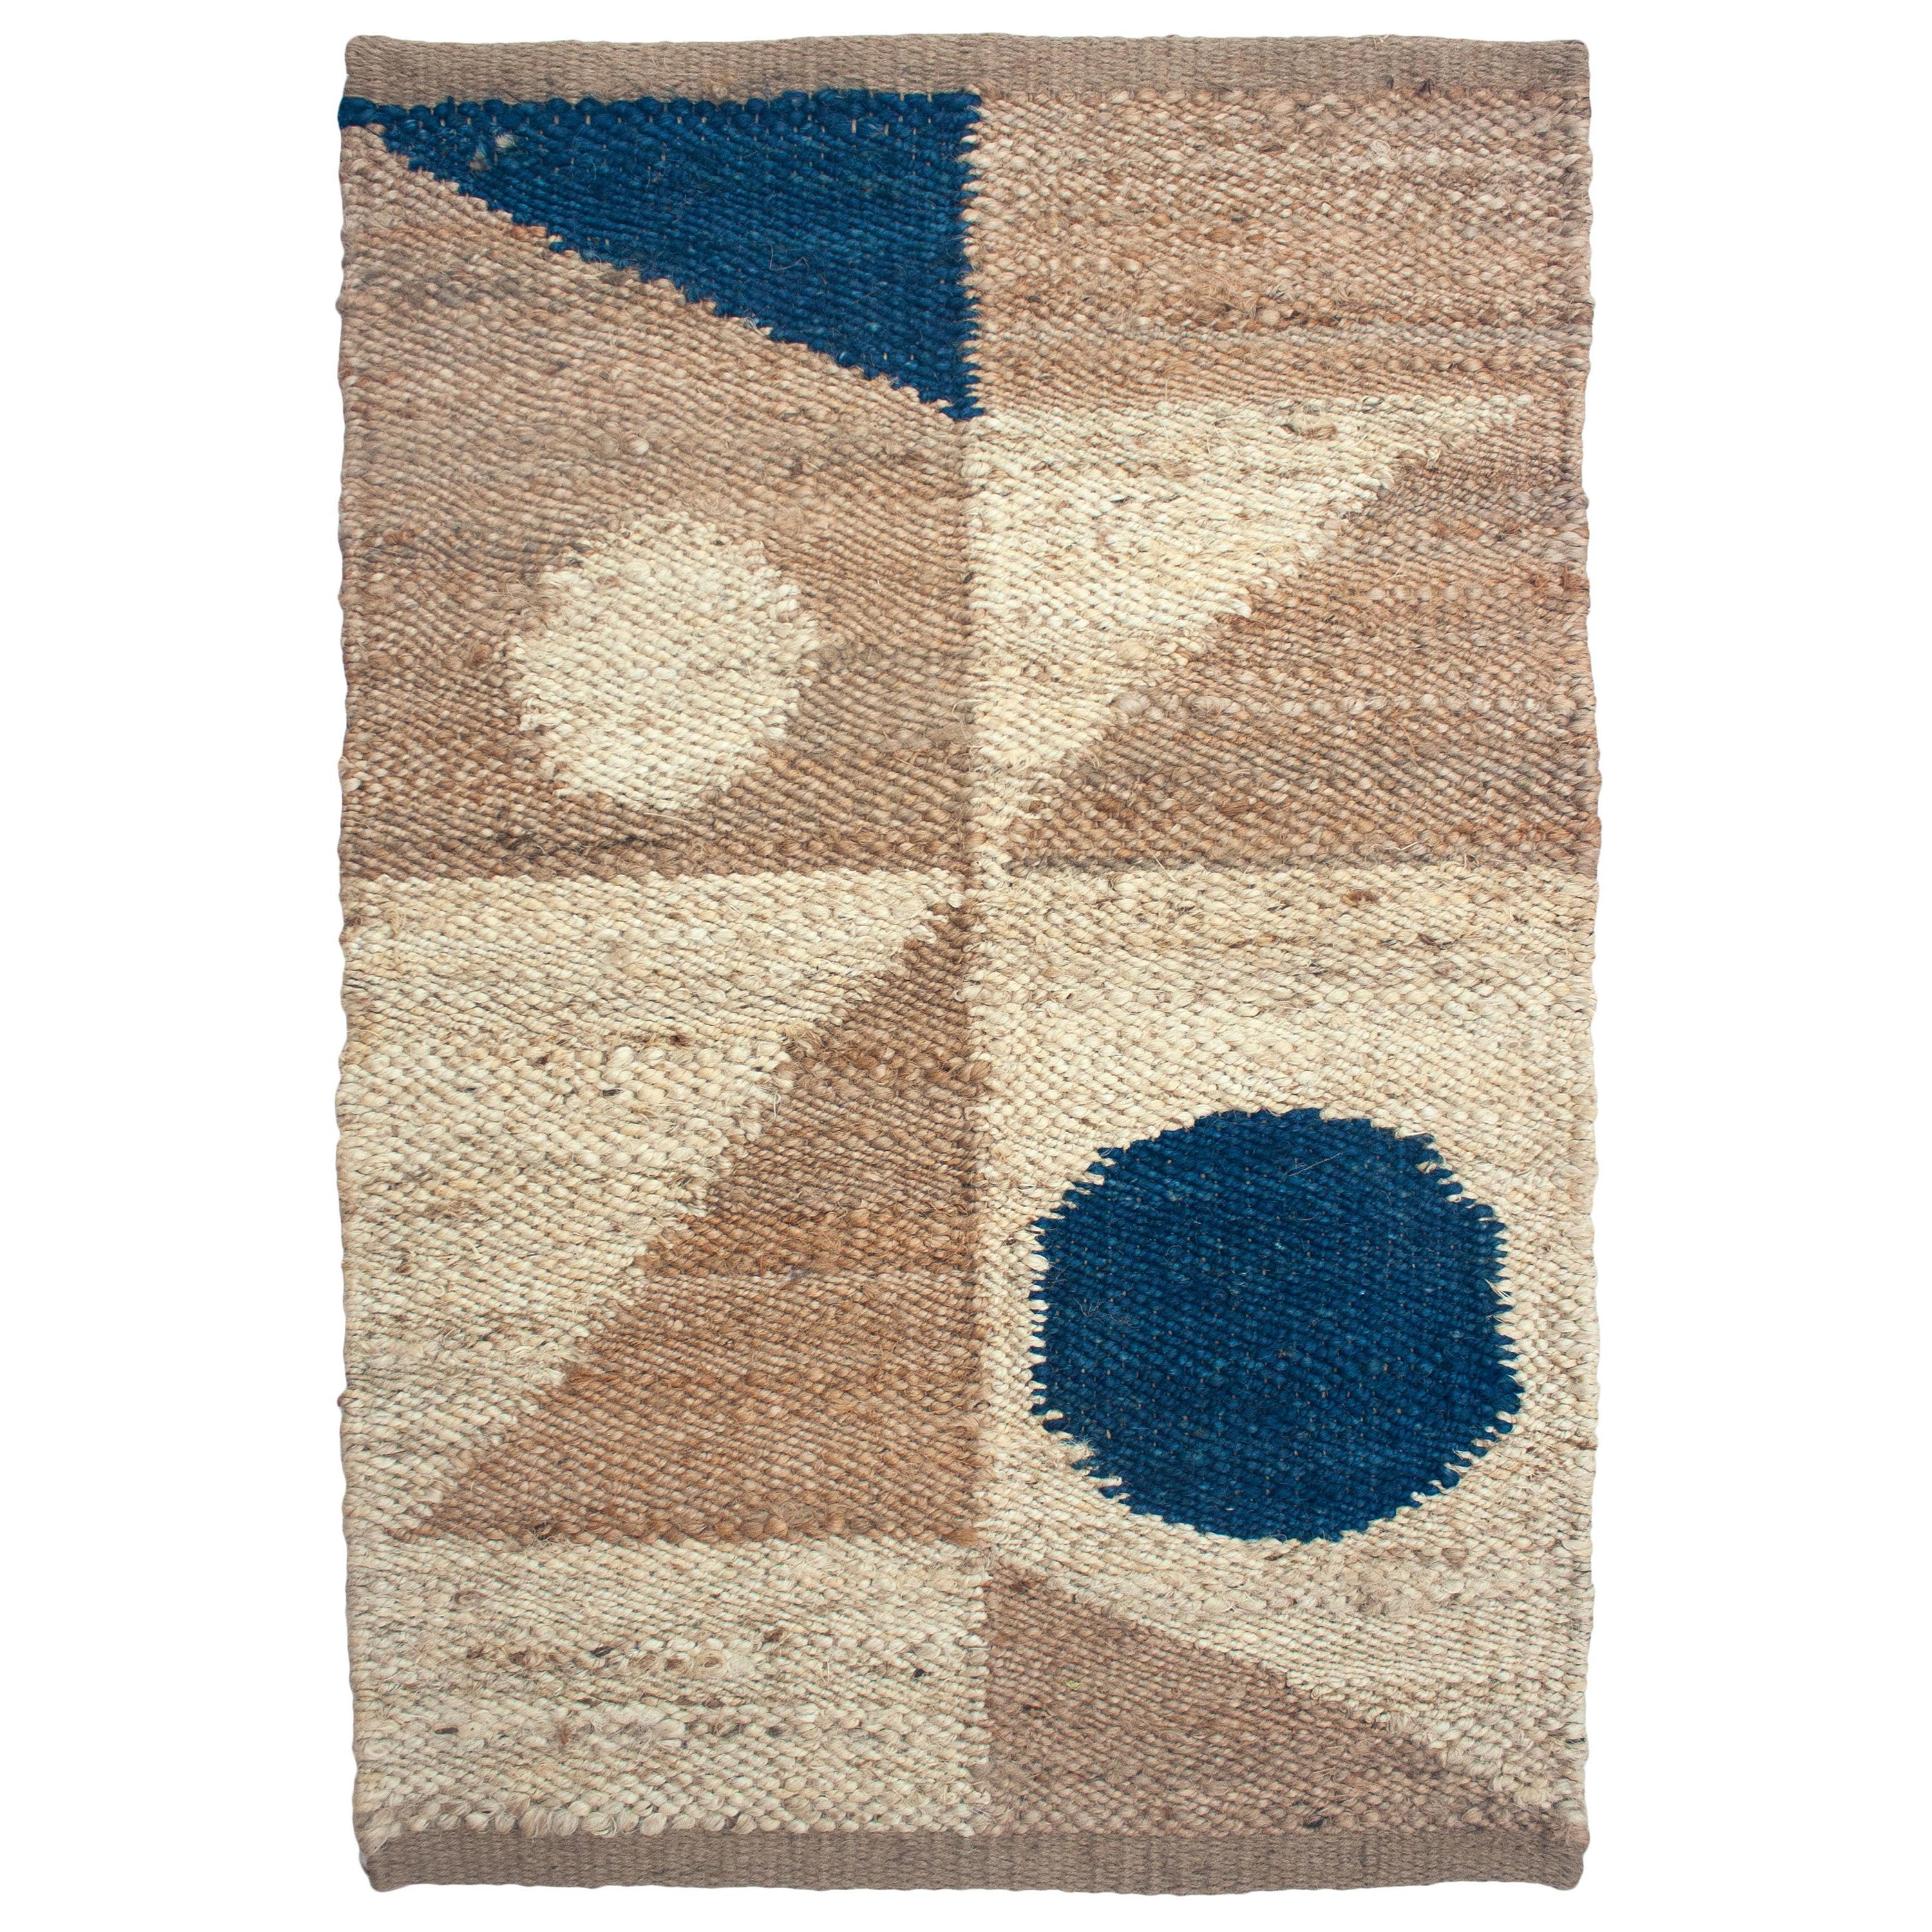 Margeaux Tribal Geometric Handwoven Modern Jute Rug, Carpet and Durrie